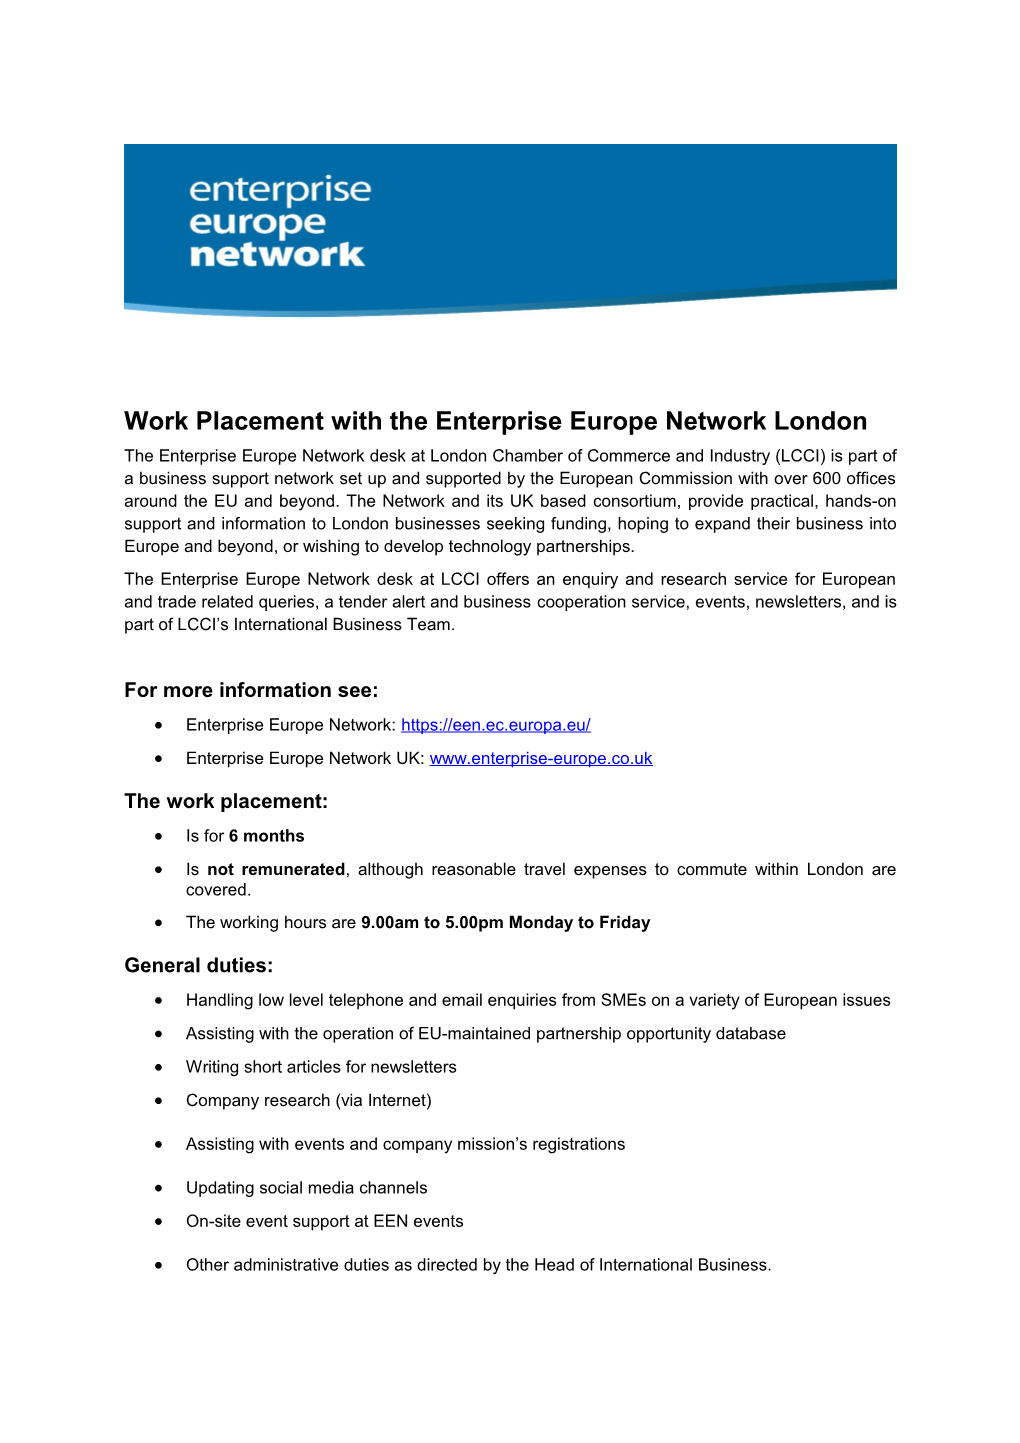 Work Placement with the Enterprise Europe Network London